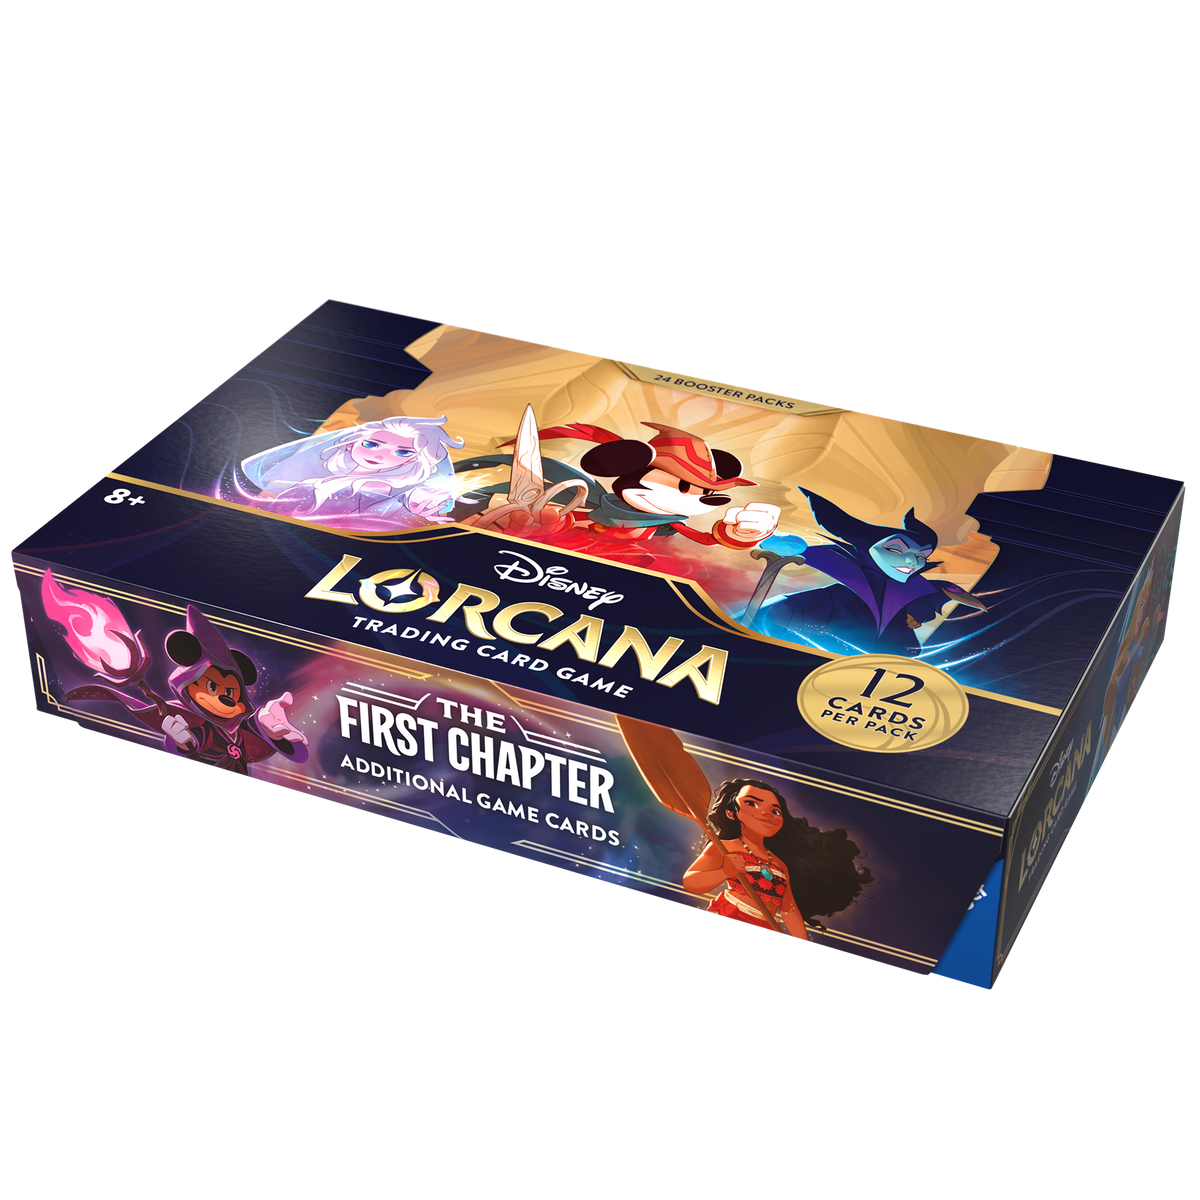 Disney Lorcana TCG: The First Chapter - Booster Pack (24 Display)